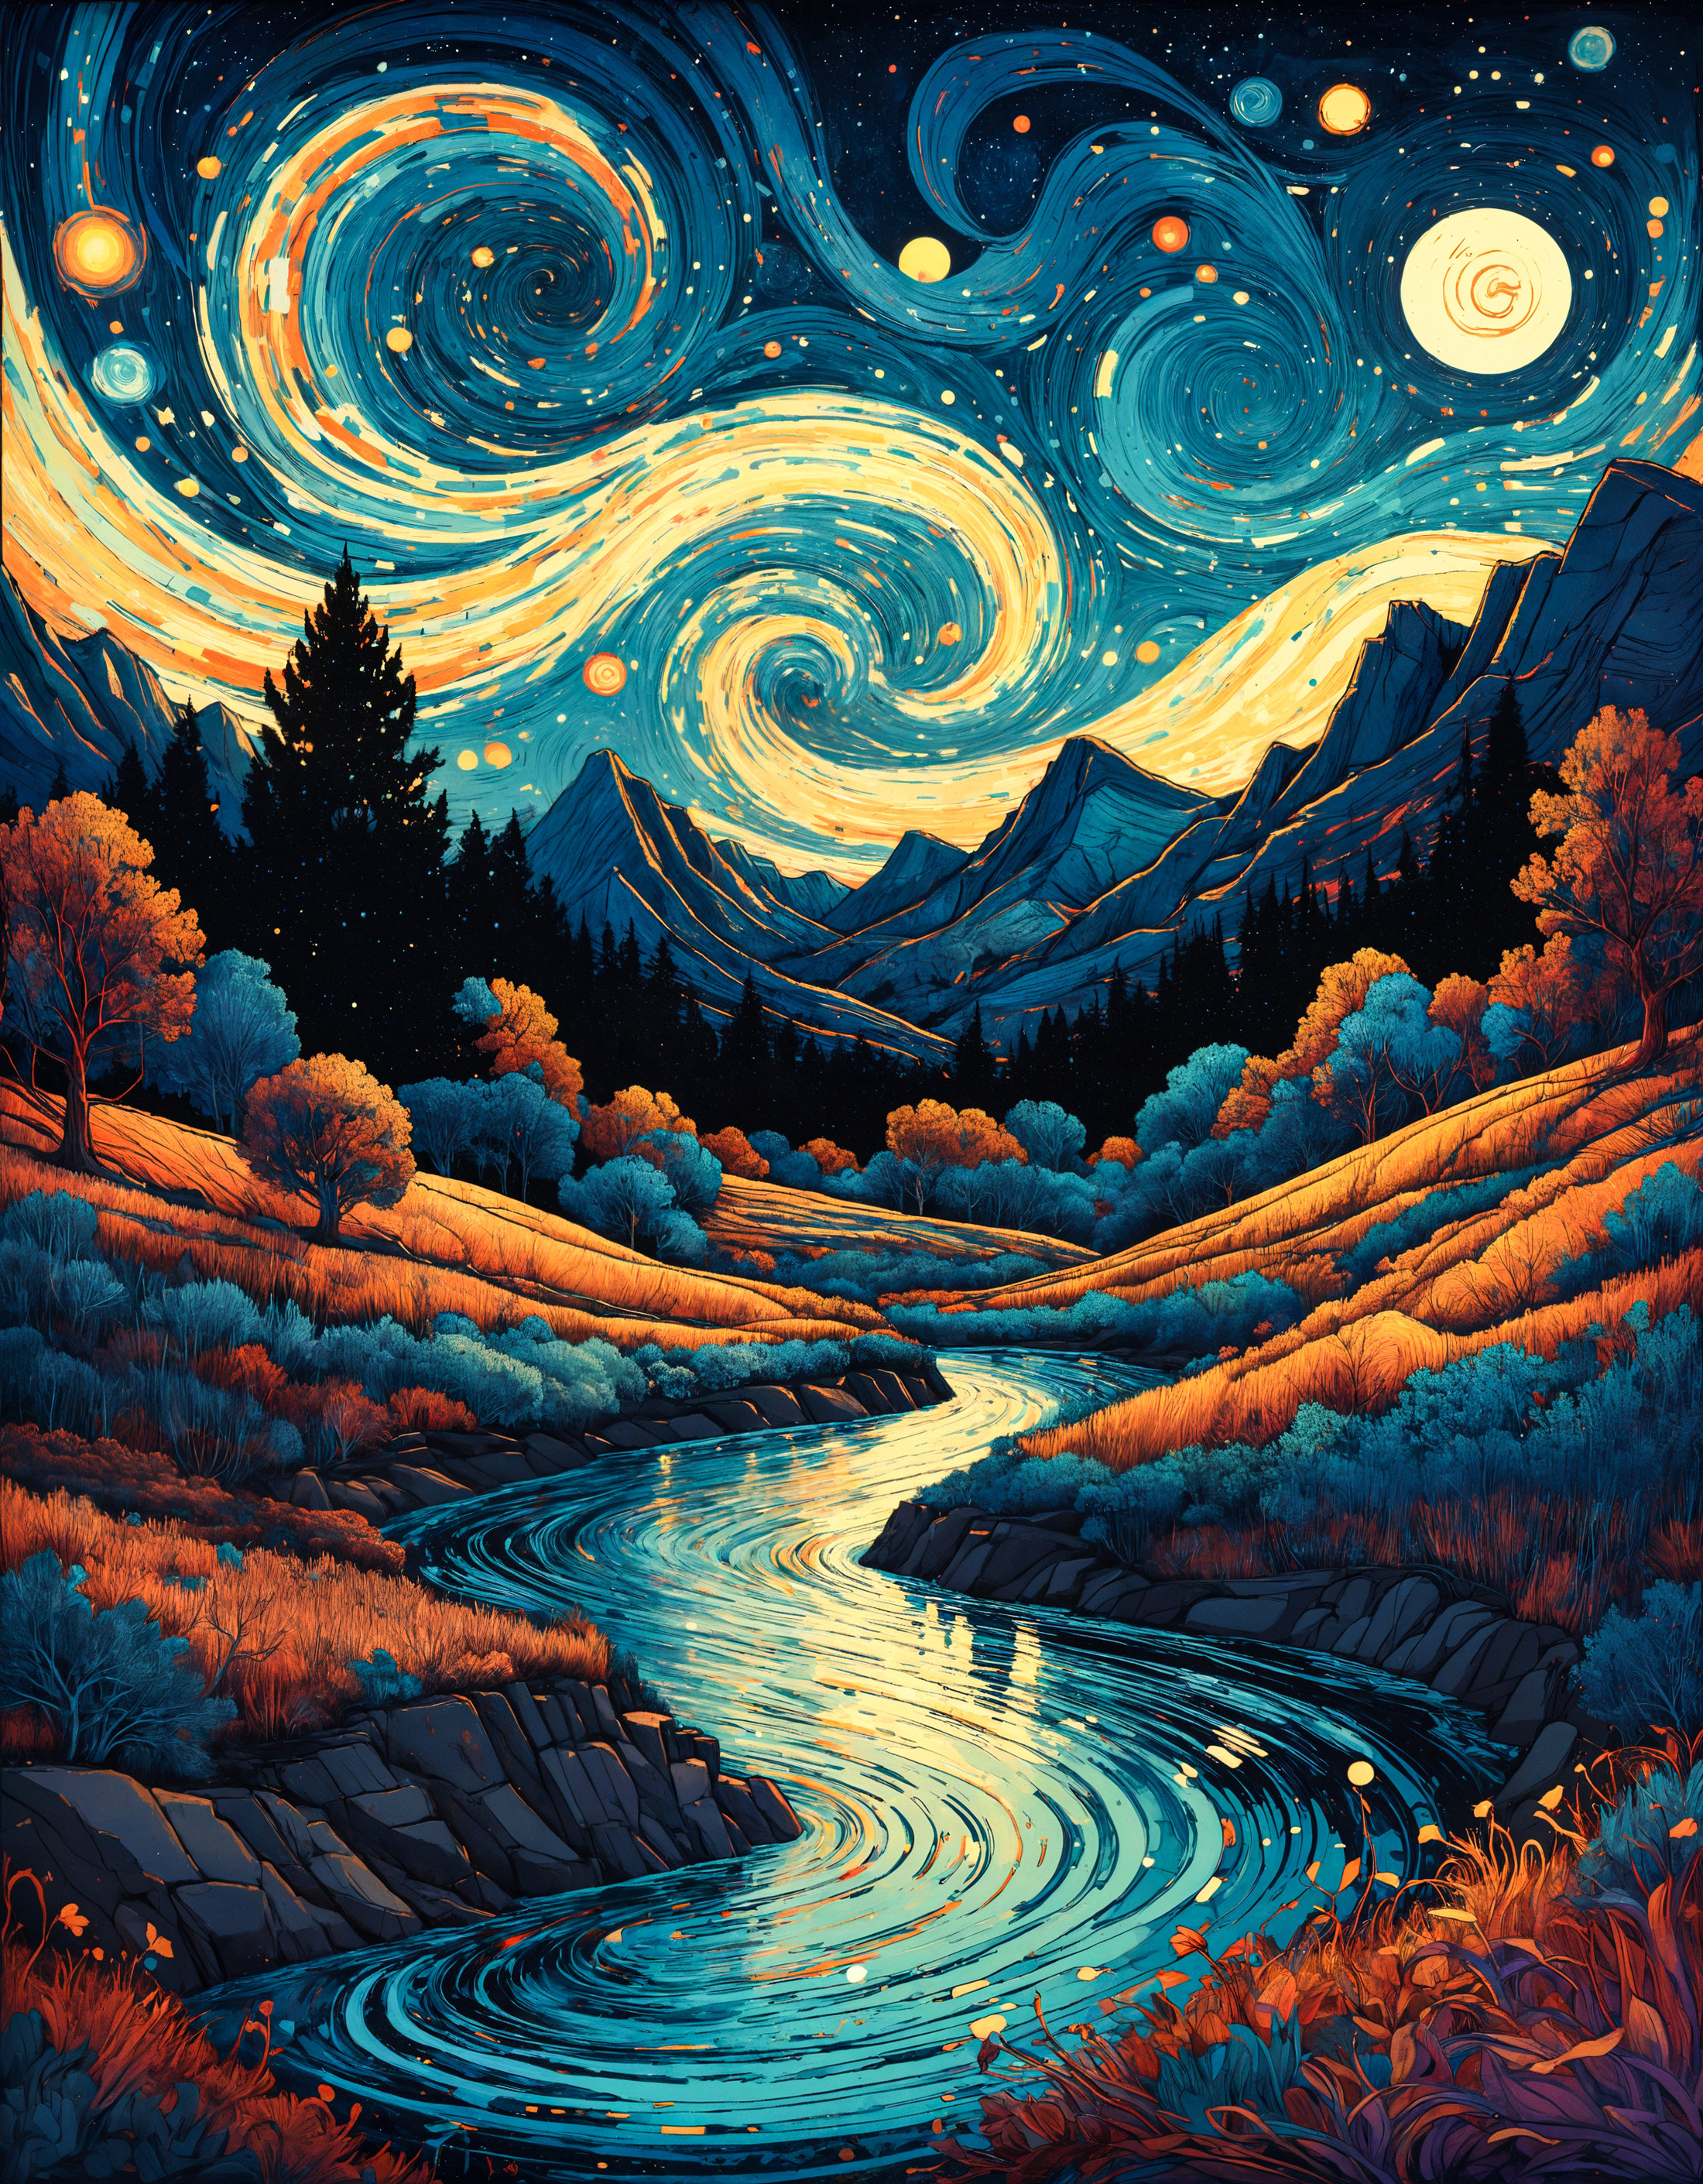 Art by James R. Eads, Swirling and flowing lines define the vivid landscapes and sky, drawing inspiration from Van Gogh's ...